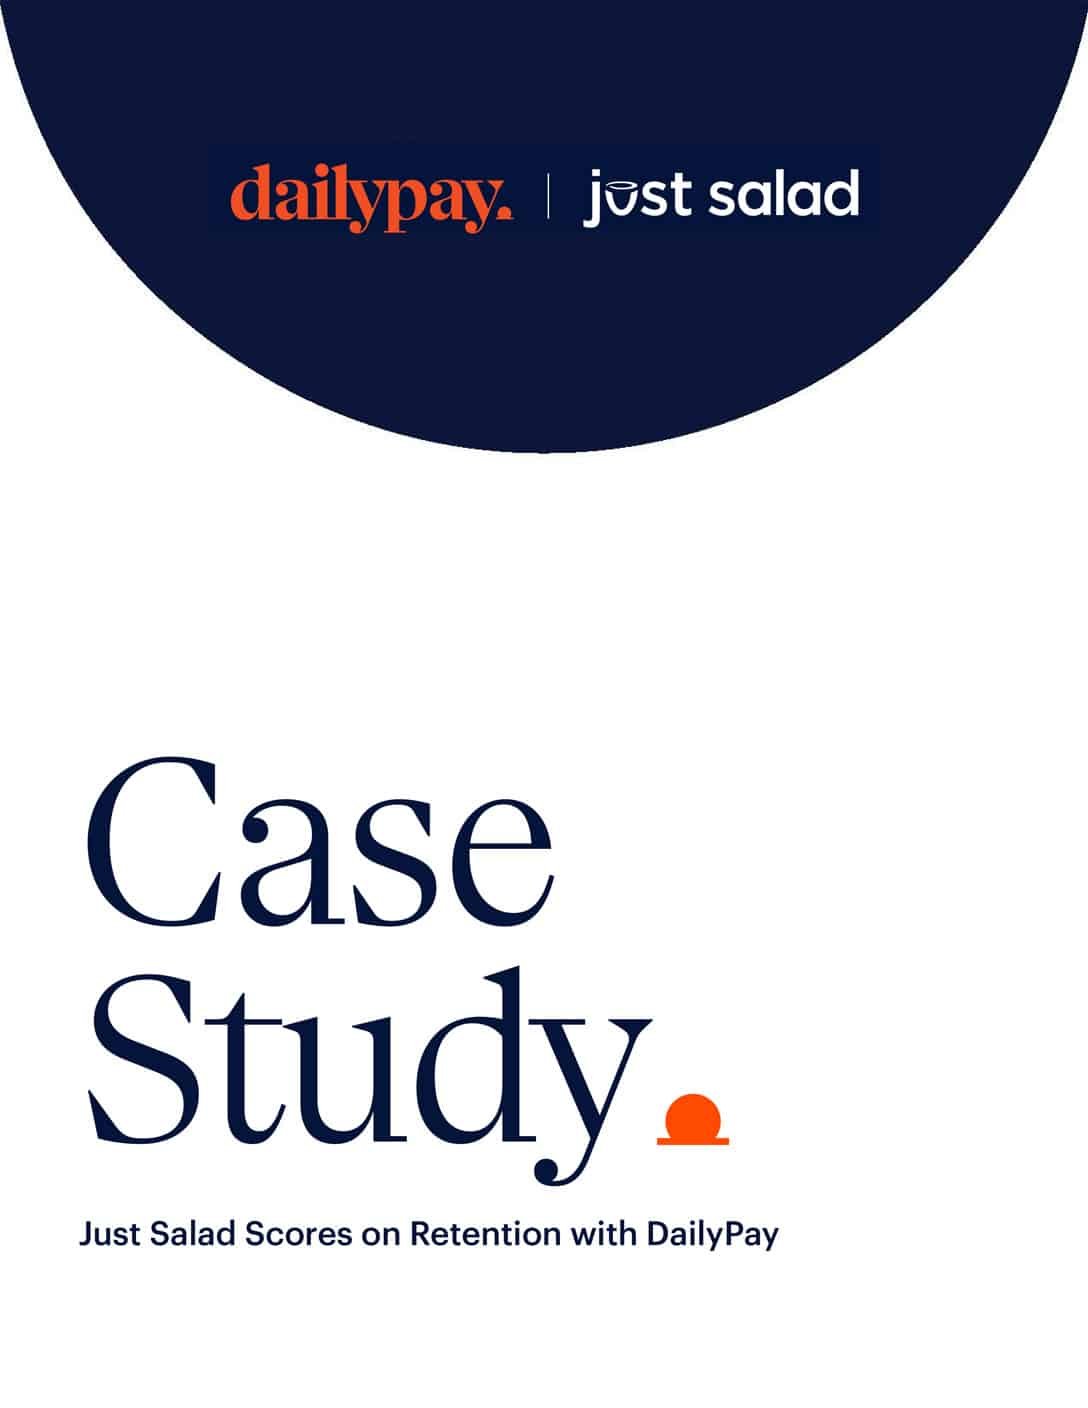 A visually minimalistic case study cover. The top part of the image displays logos of "dailypay" in orange and "just salad" in white against a dark blue semi-circular background. Below, large navy blue text reads "Case Study," with smaller text underneath stating "Just Salad Scores on Retention with DailyPay.